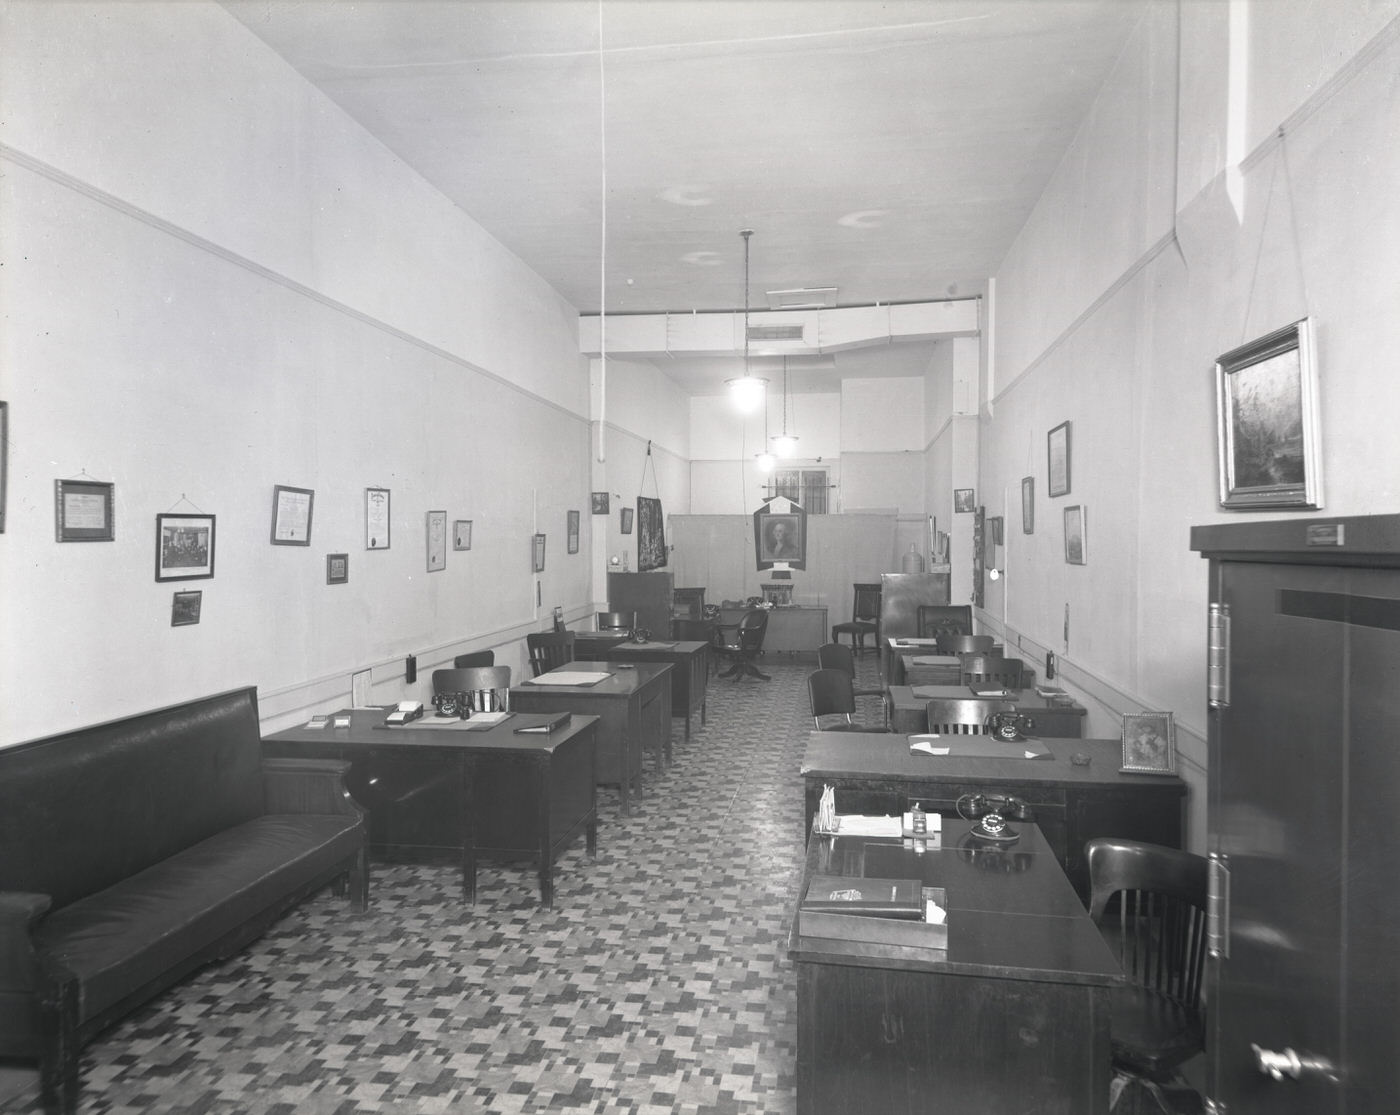 A. D. McClain Realty Interior View, 1930s